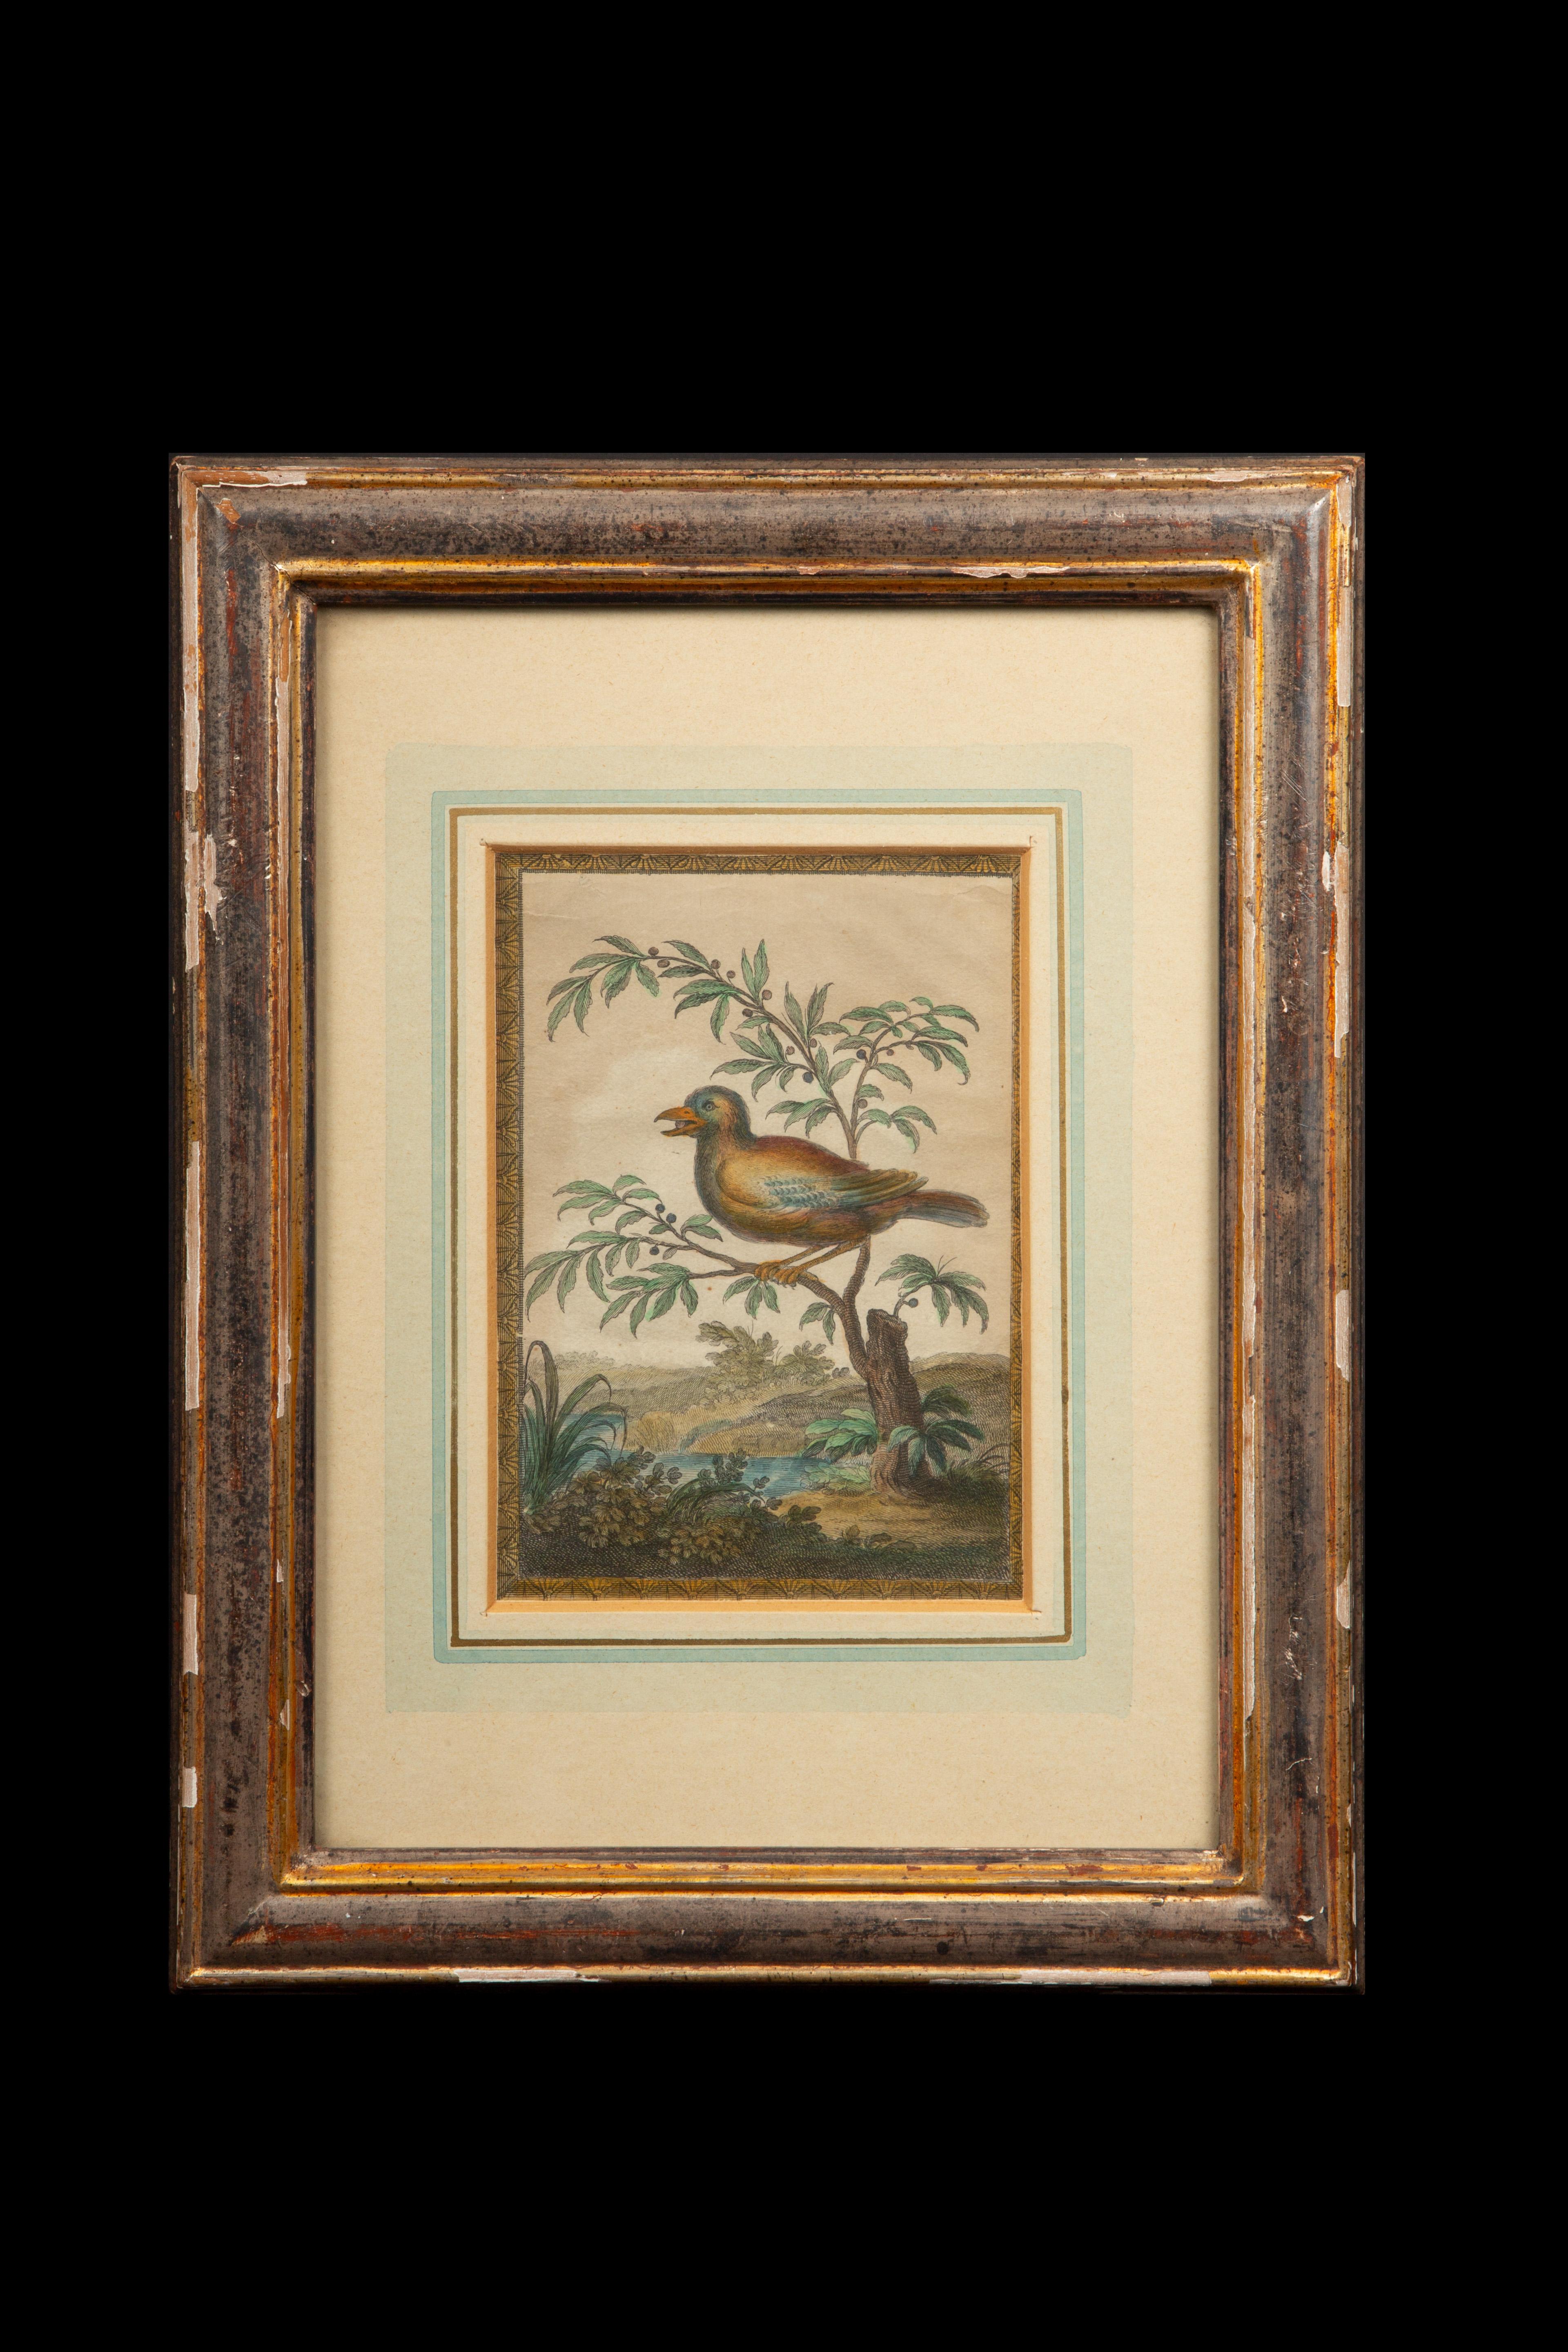 These 18th-century colored engravings of birds are part of a fascinating collection depicting a section of Raphael's Vatican Loggia. These engravings are derived from the meticulous 83-plate survey showcasing the ornate frescoes designed by Raphael